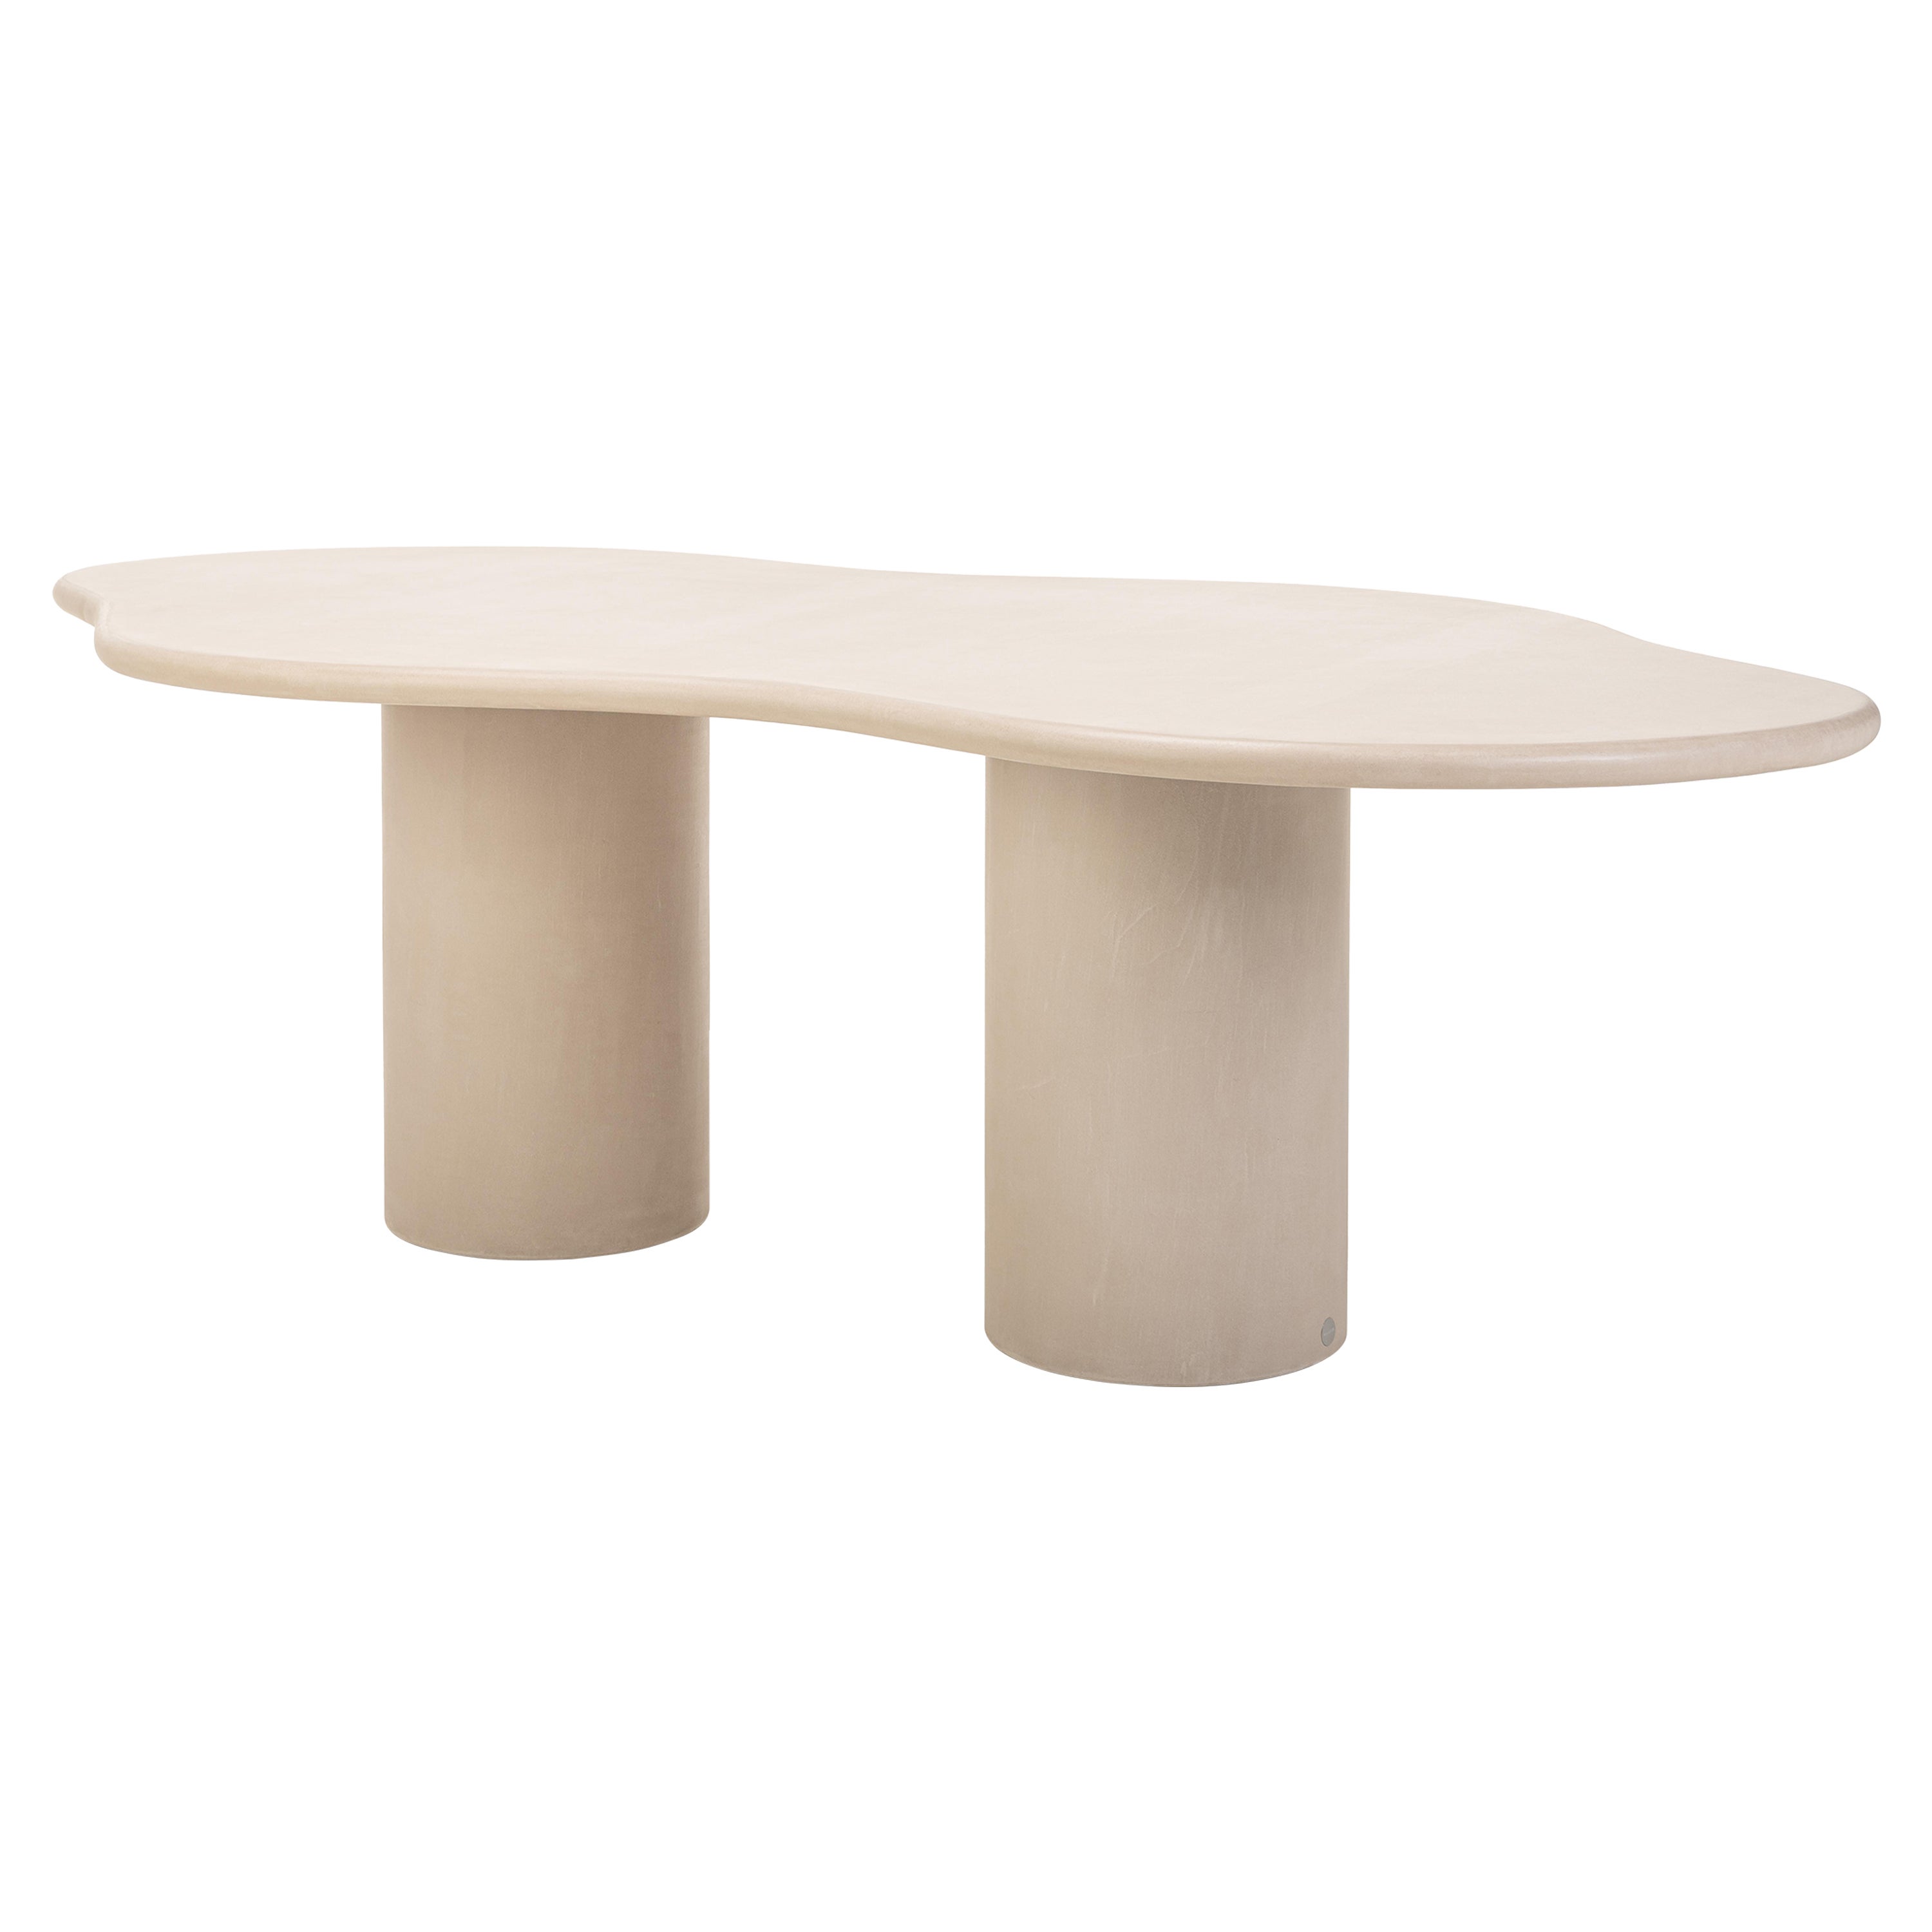 Natural Plaster Dining Table "Fluent" 240 by Isabelle Beaumont For Sale